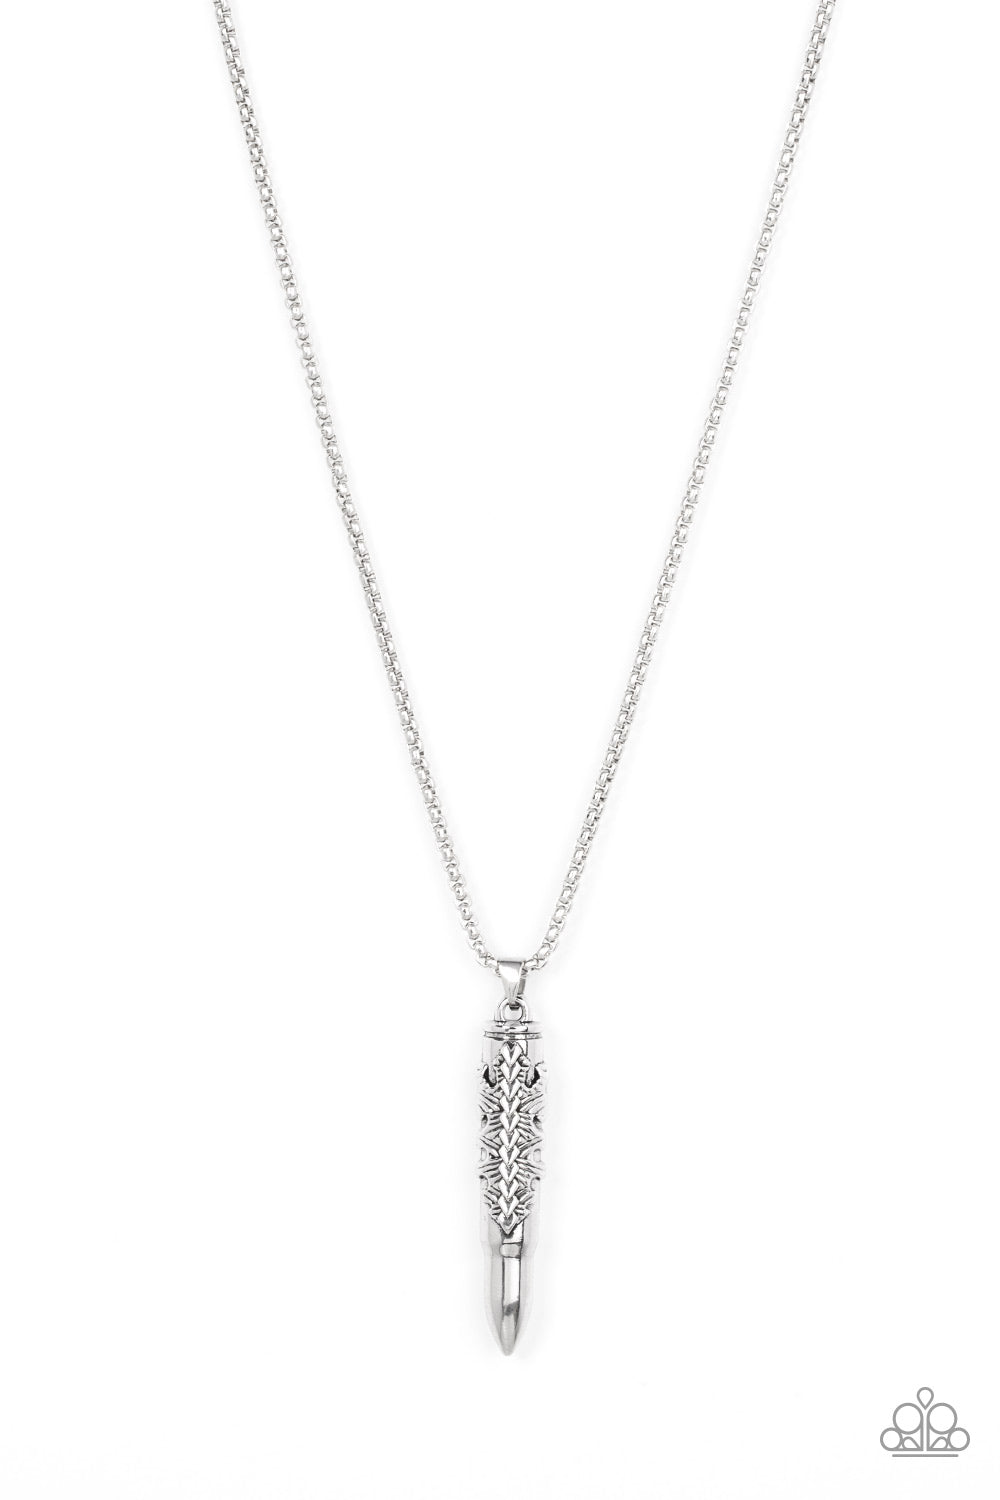 Paparazzi Accessories Mysterious Marksman - Silver Necklace